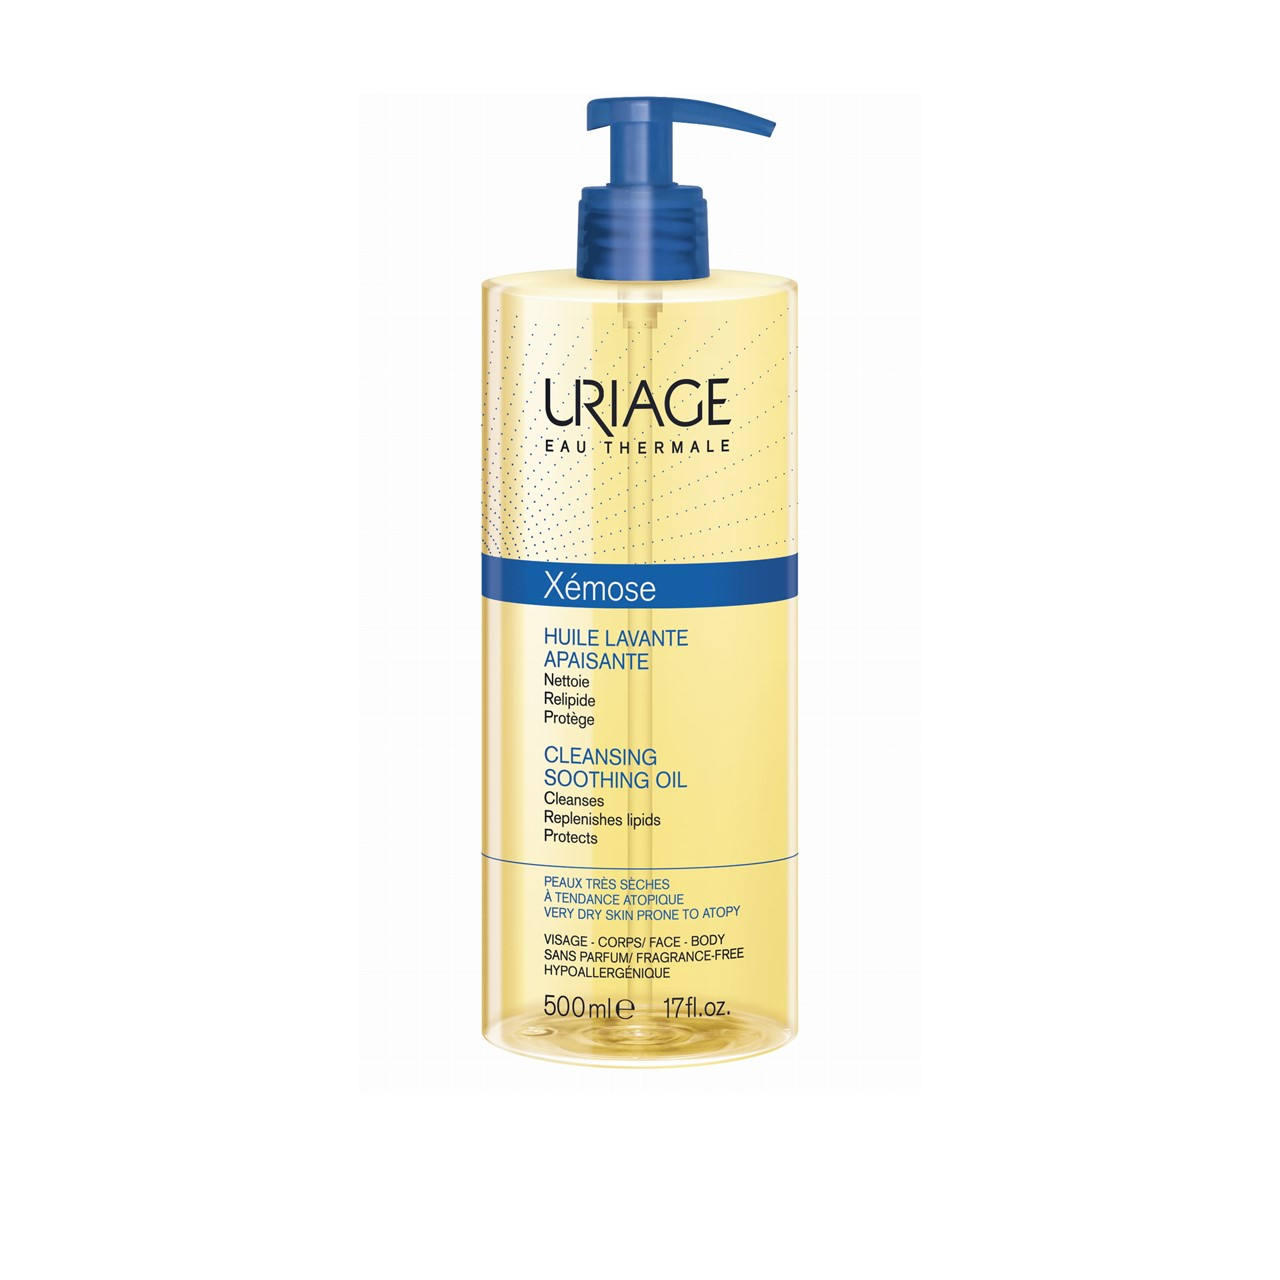 Uriage Xémose Cleansing Soothing Oil 500ml (16.91fl oz)